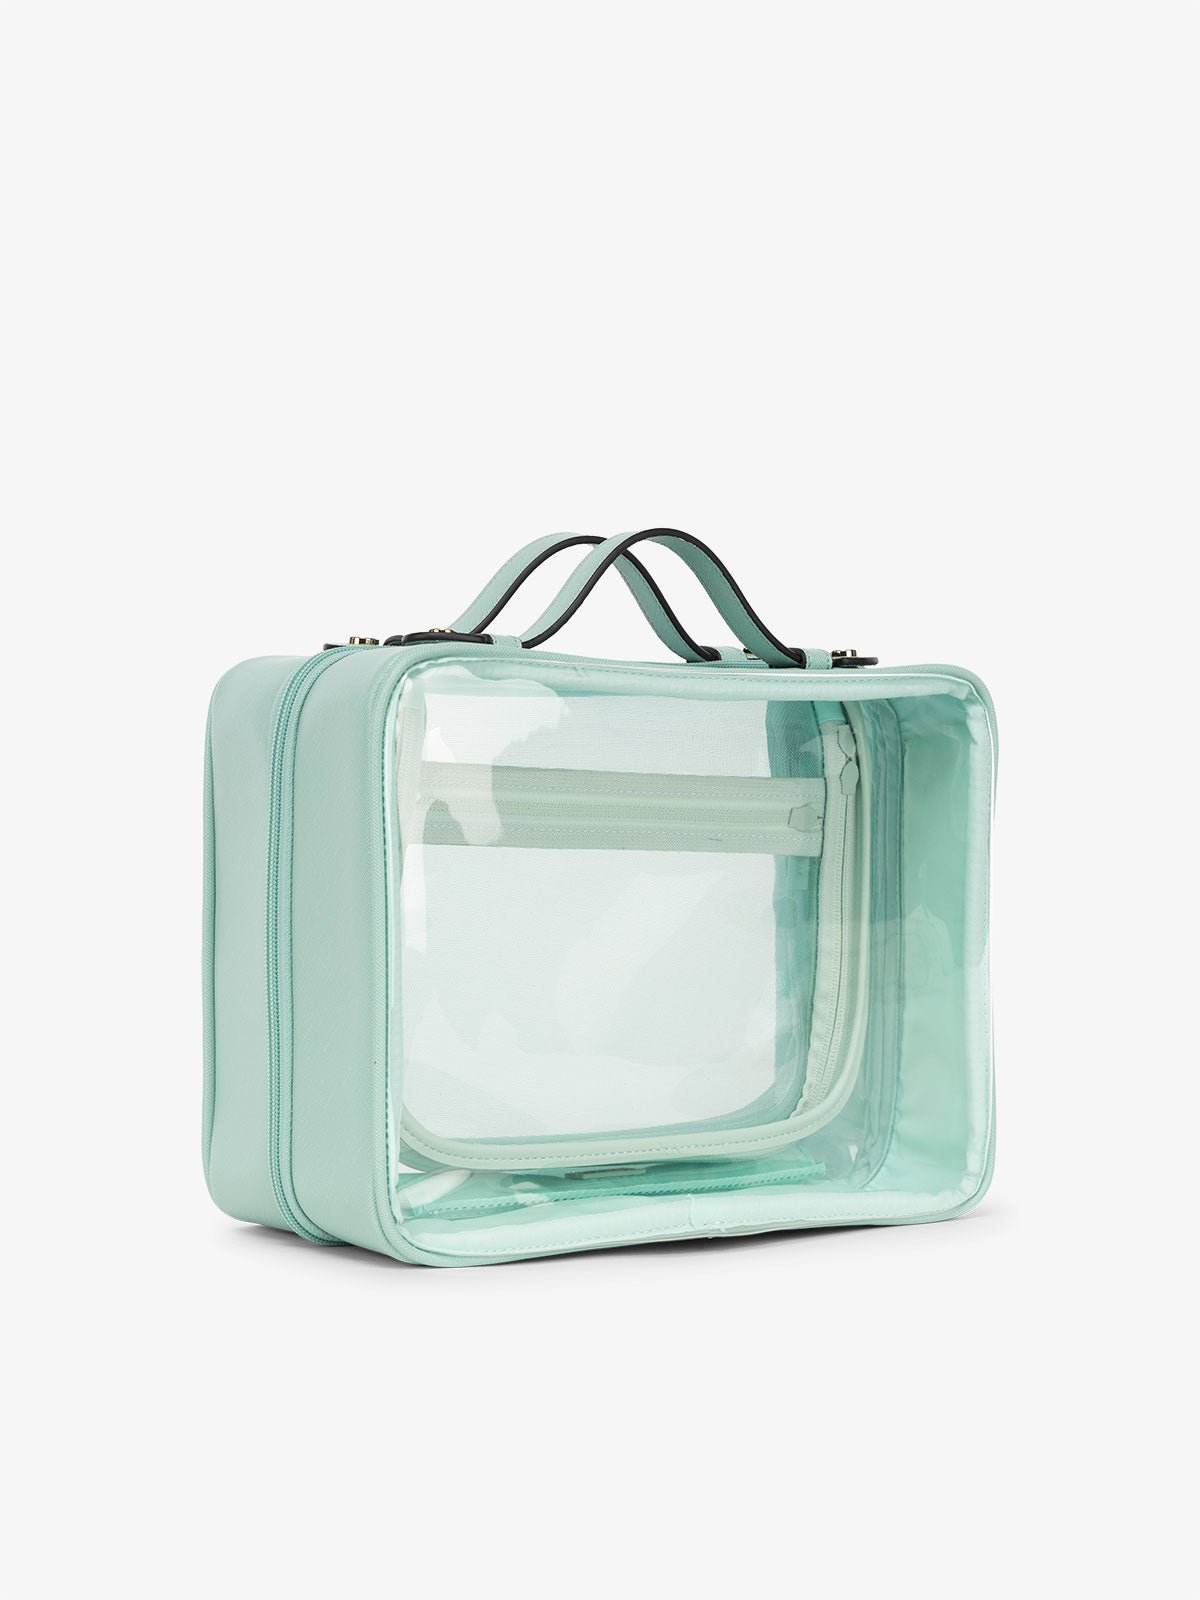 CALPAK large clear skincare bag with multiple zippered compartments in aqua blue